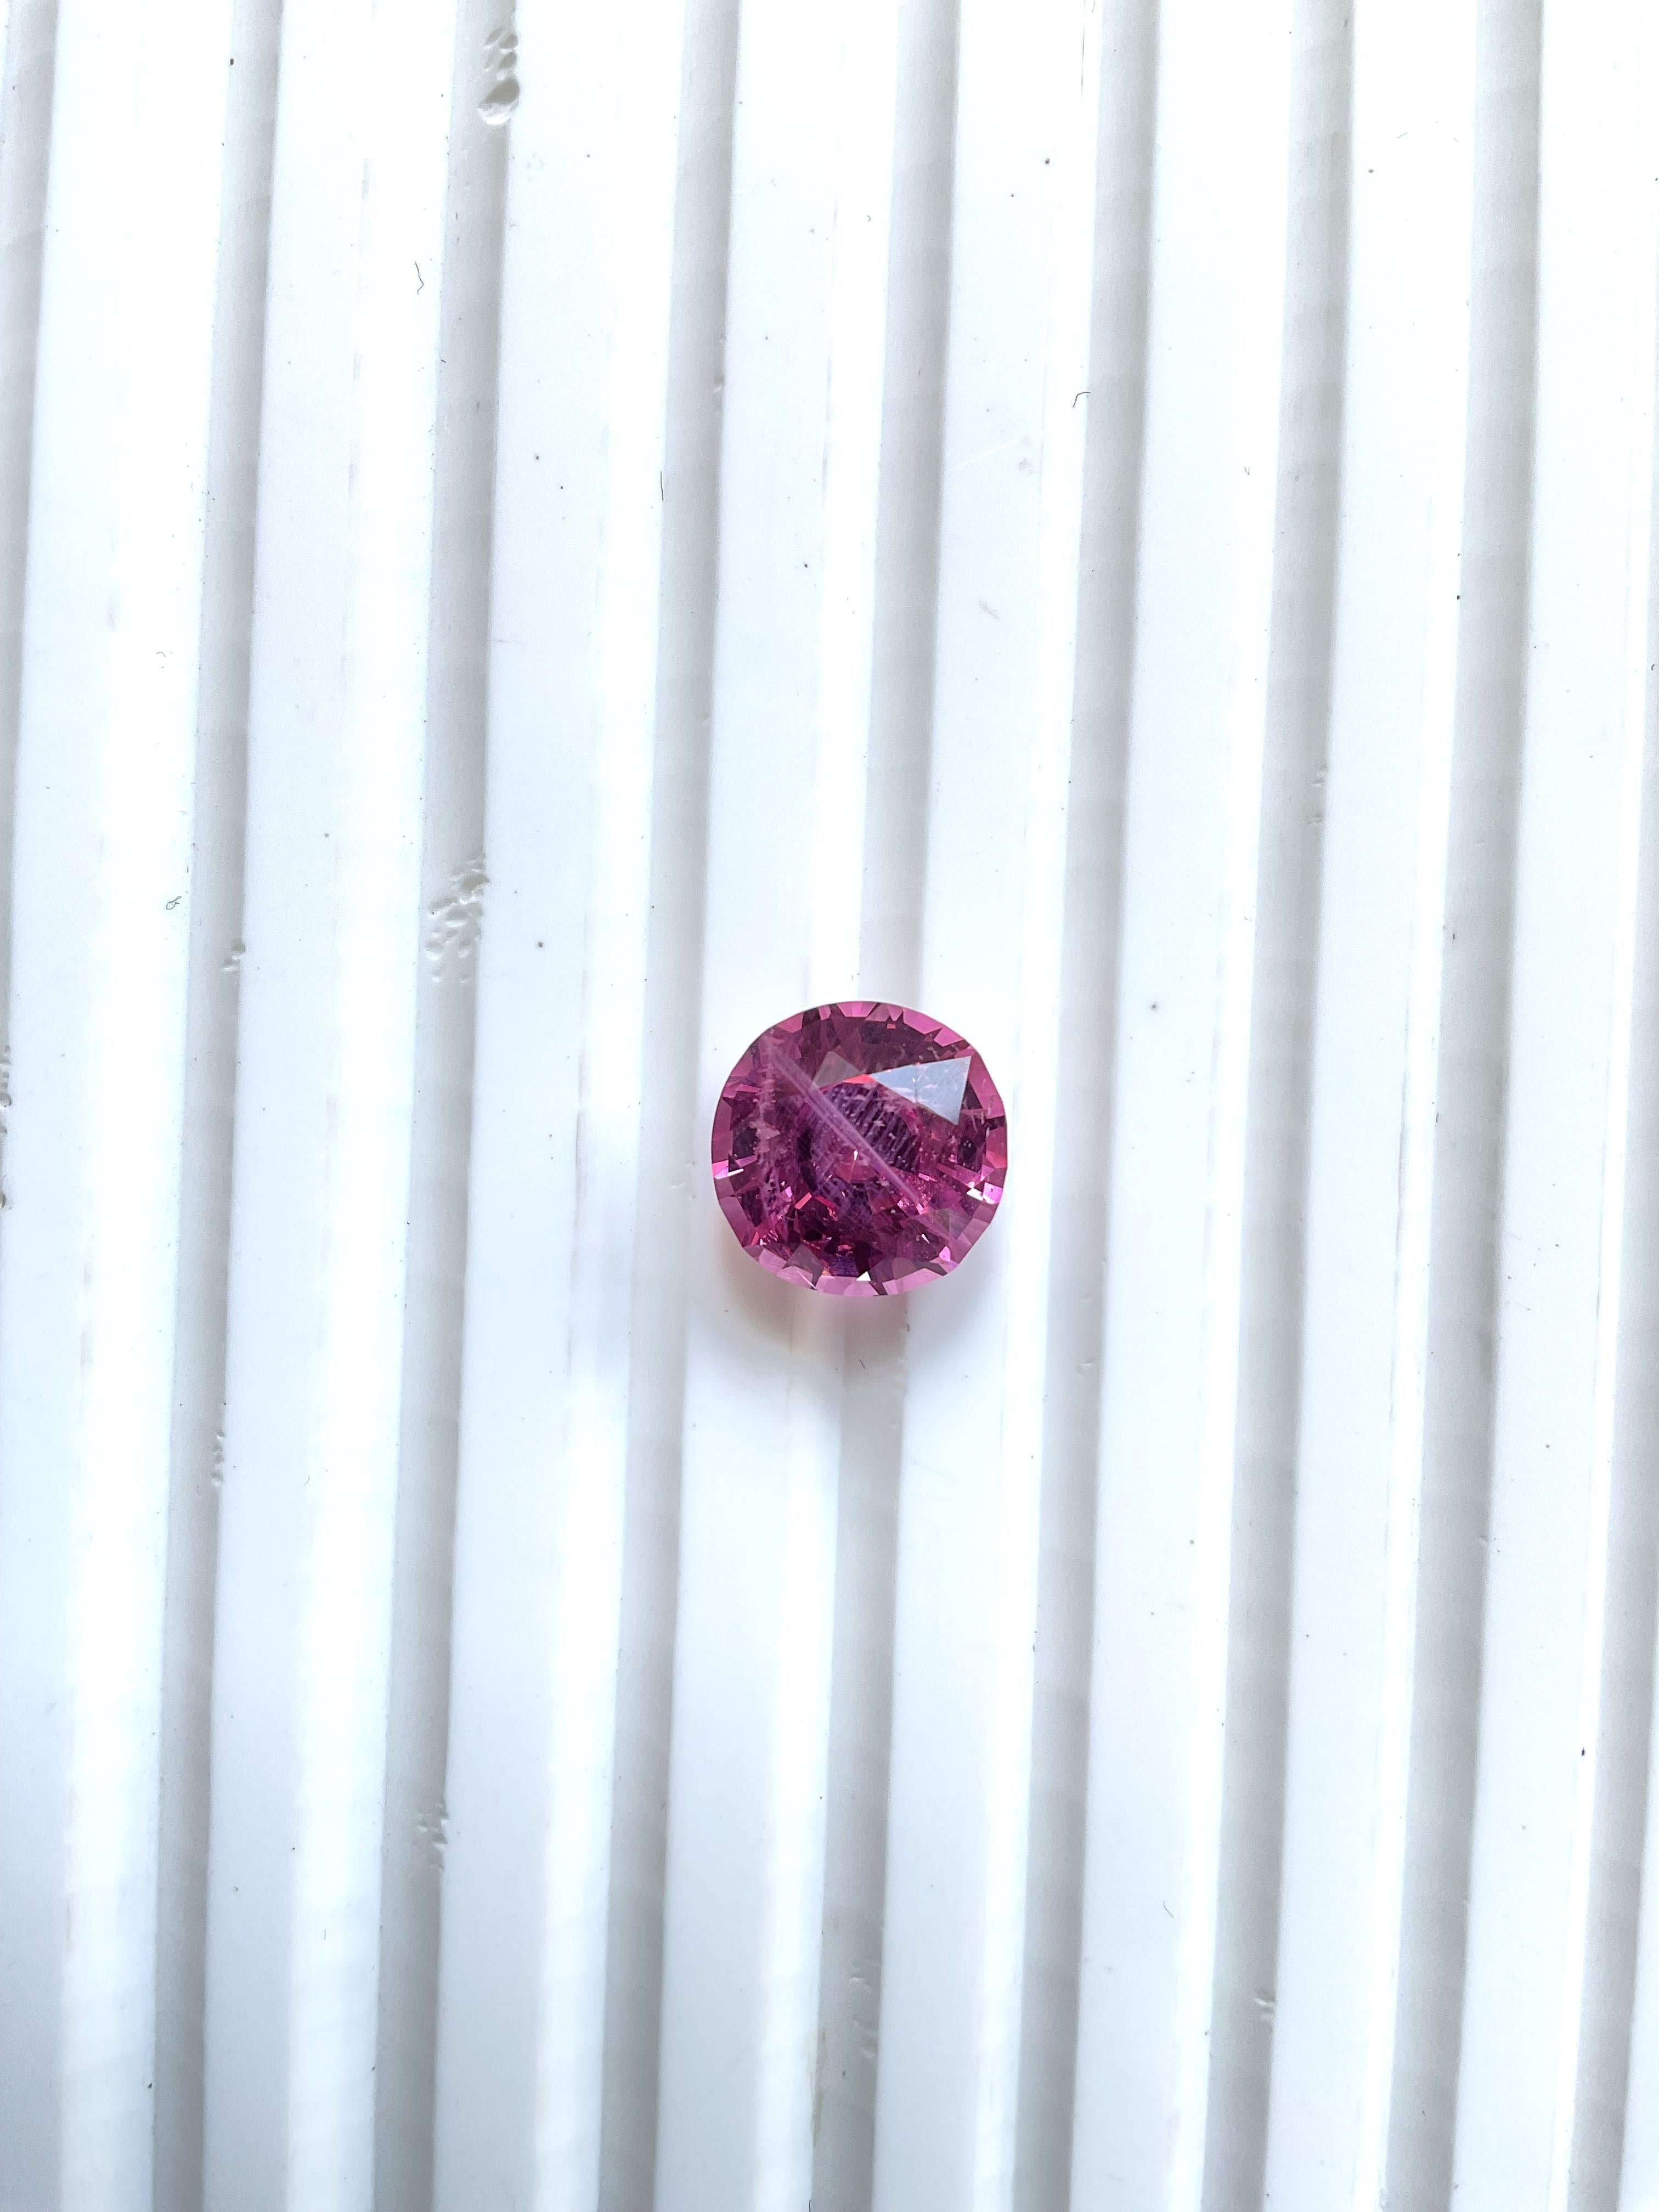 4.50 Carat Vietnam Spinel Round Cut stone for Fine Jewellery
1 pièce
Poids - 4,50 ct
Taille - 7x10 mm
Forme - Ronde